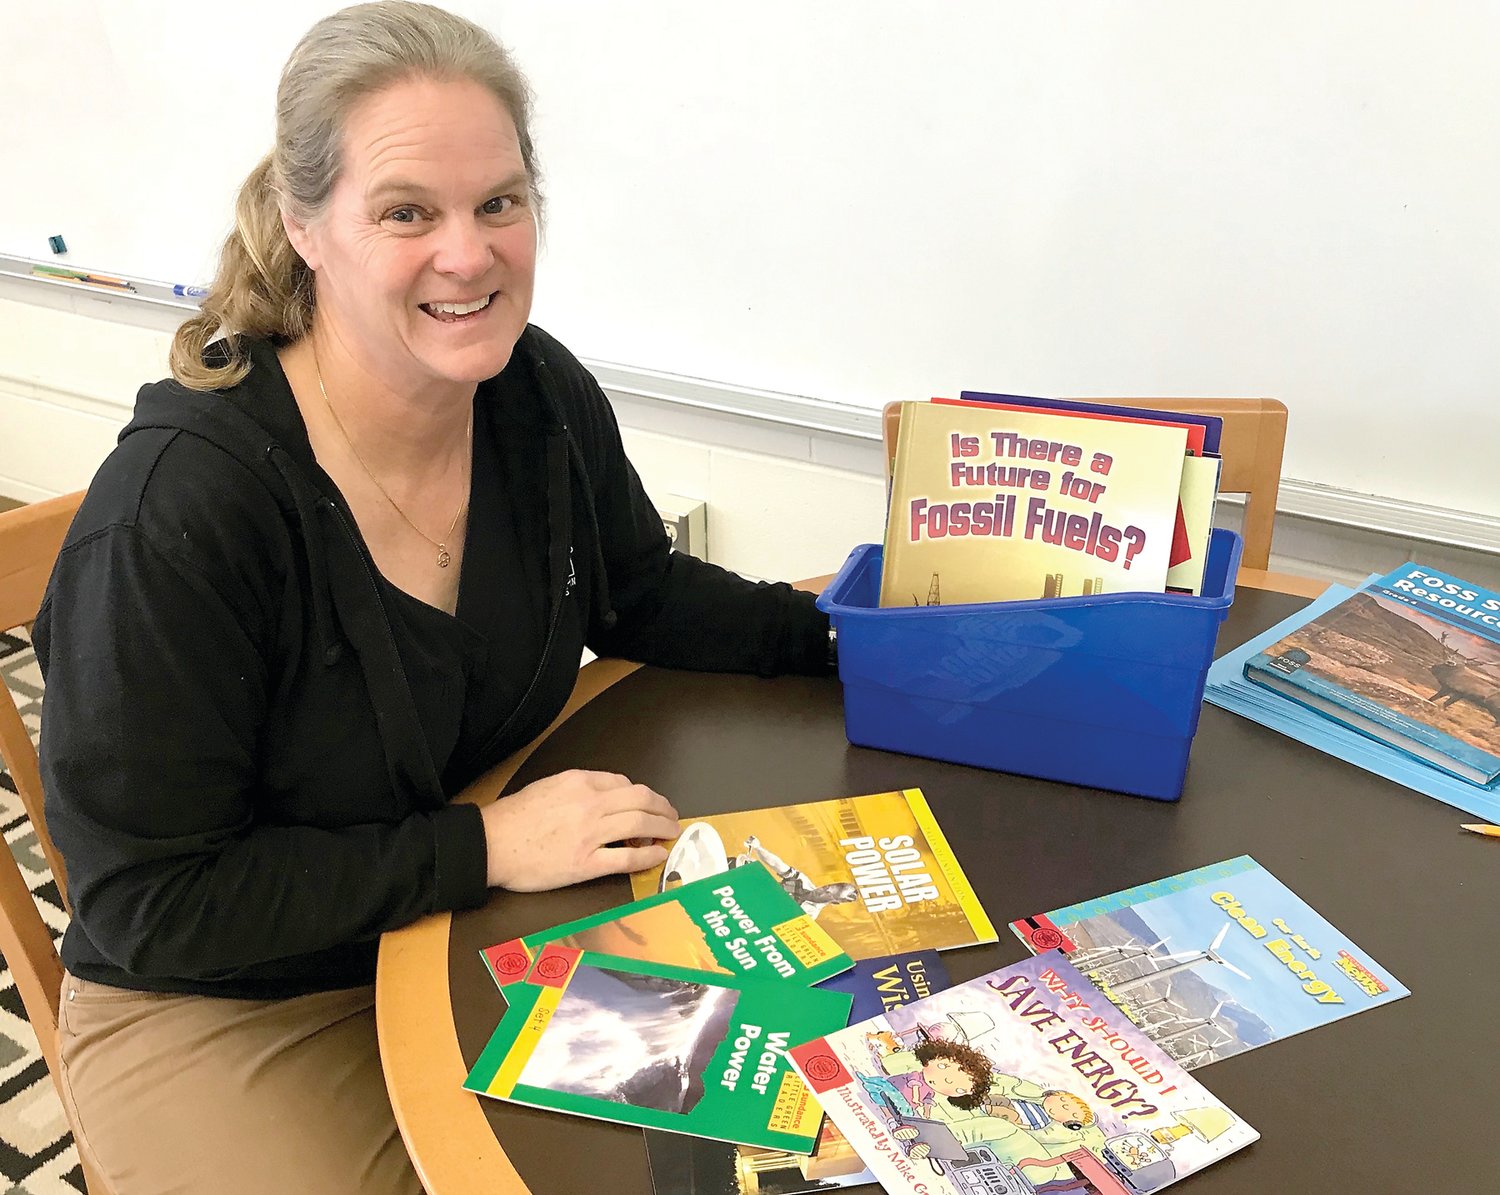 Richland Elementary School fourth-grade science and social studies teacher Kim Casale said the new books are “a powerful asset to our classroom.”